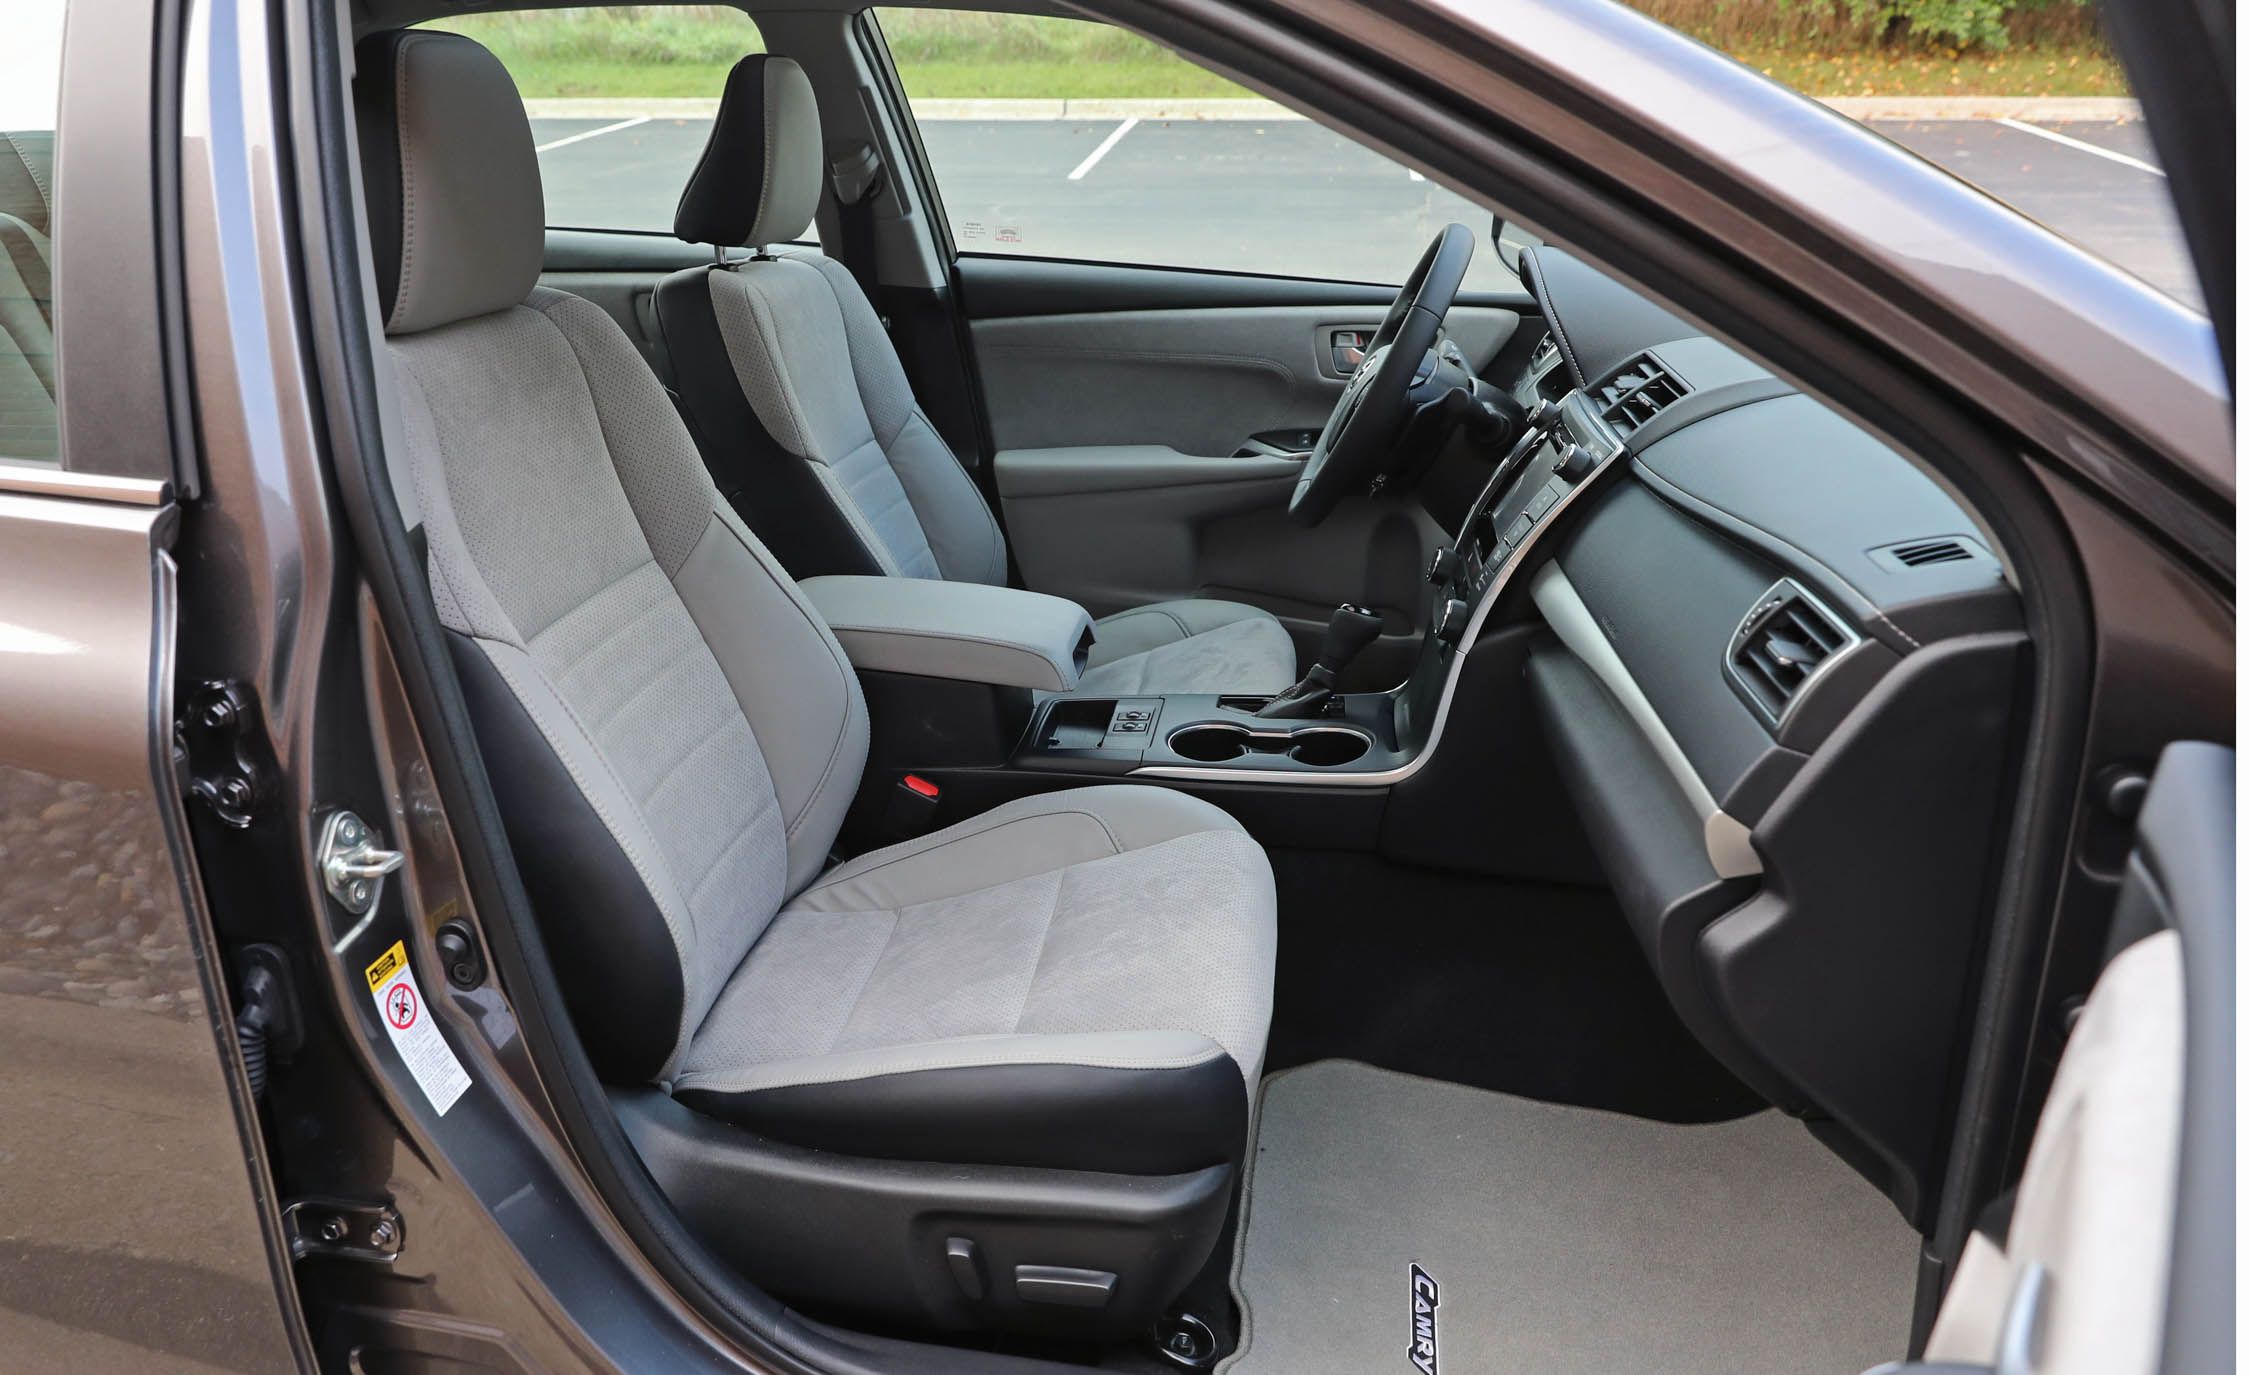 2017 Toyota Camry Interior Seats Front (View 20 of 37)